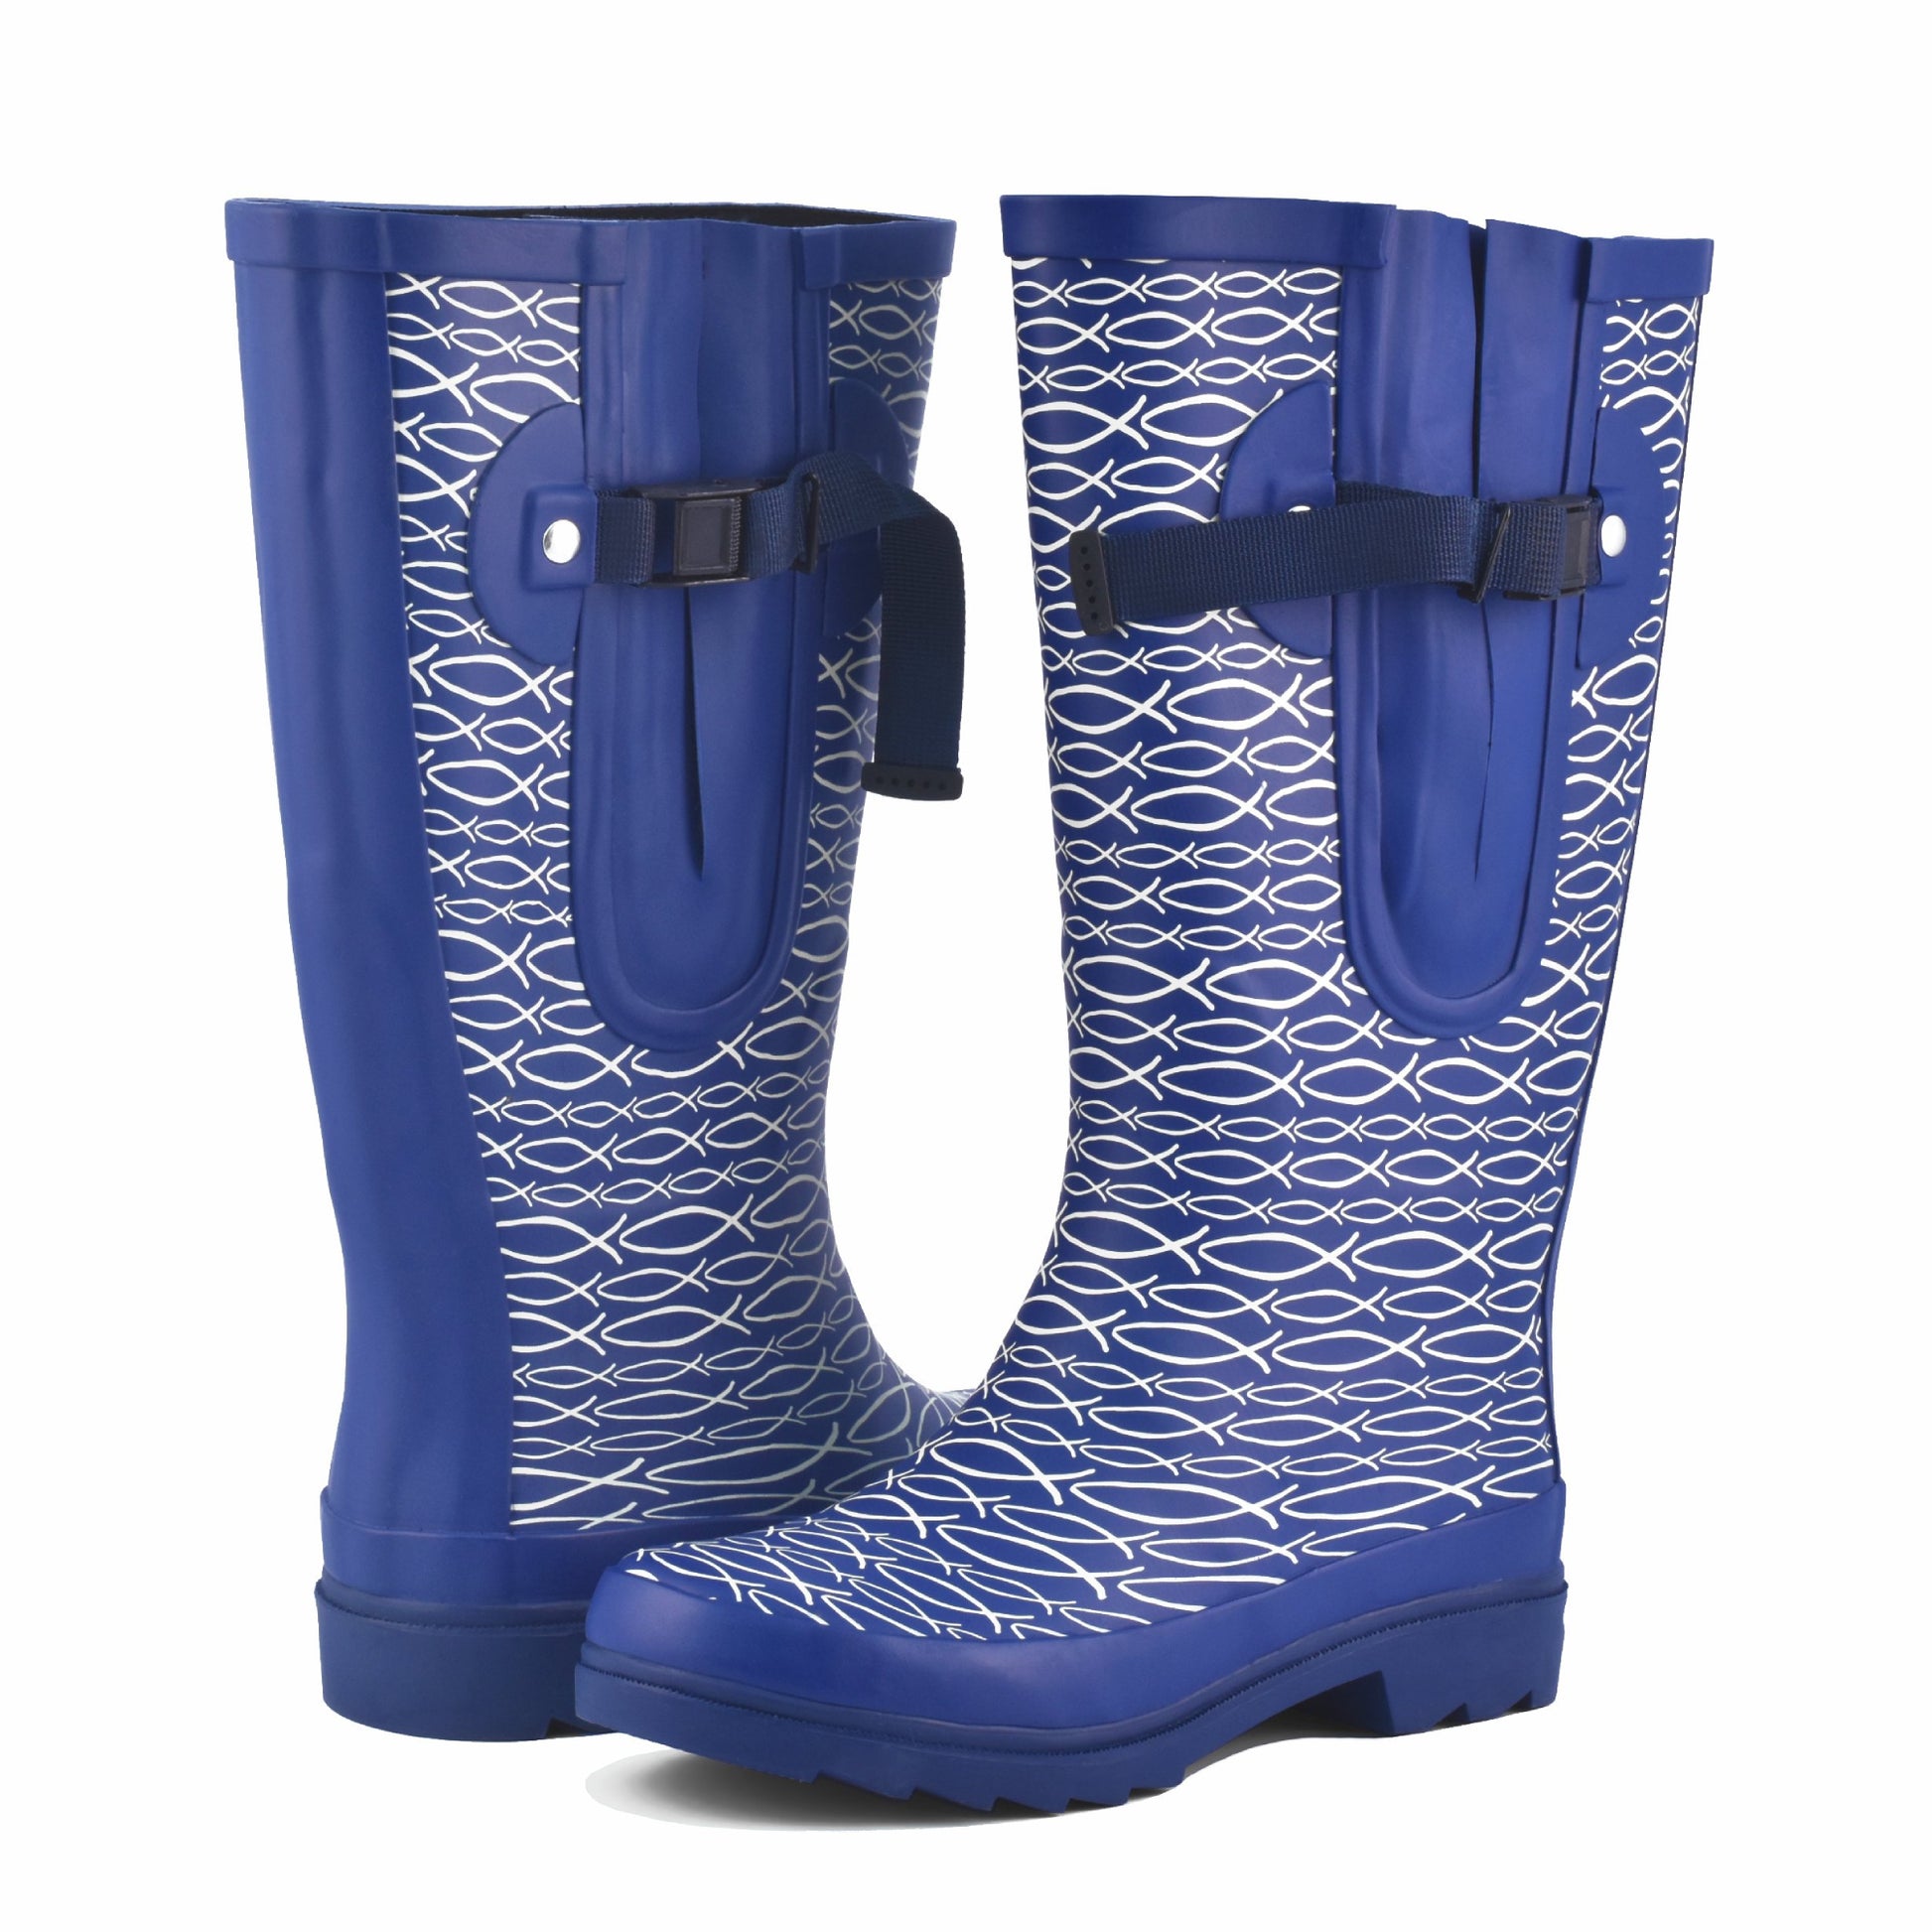 blue wellies for fishing